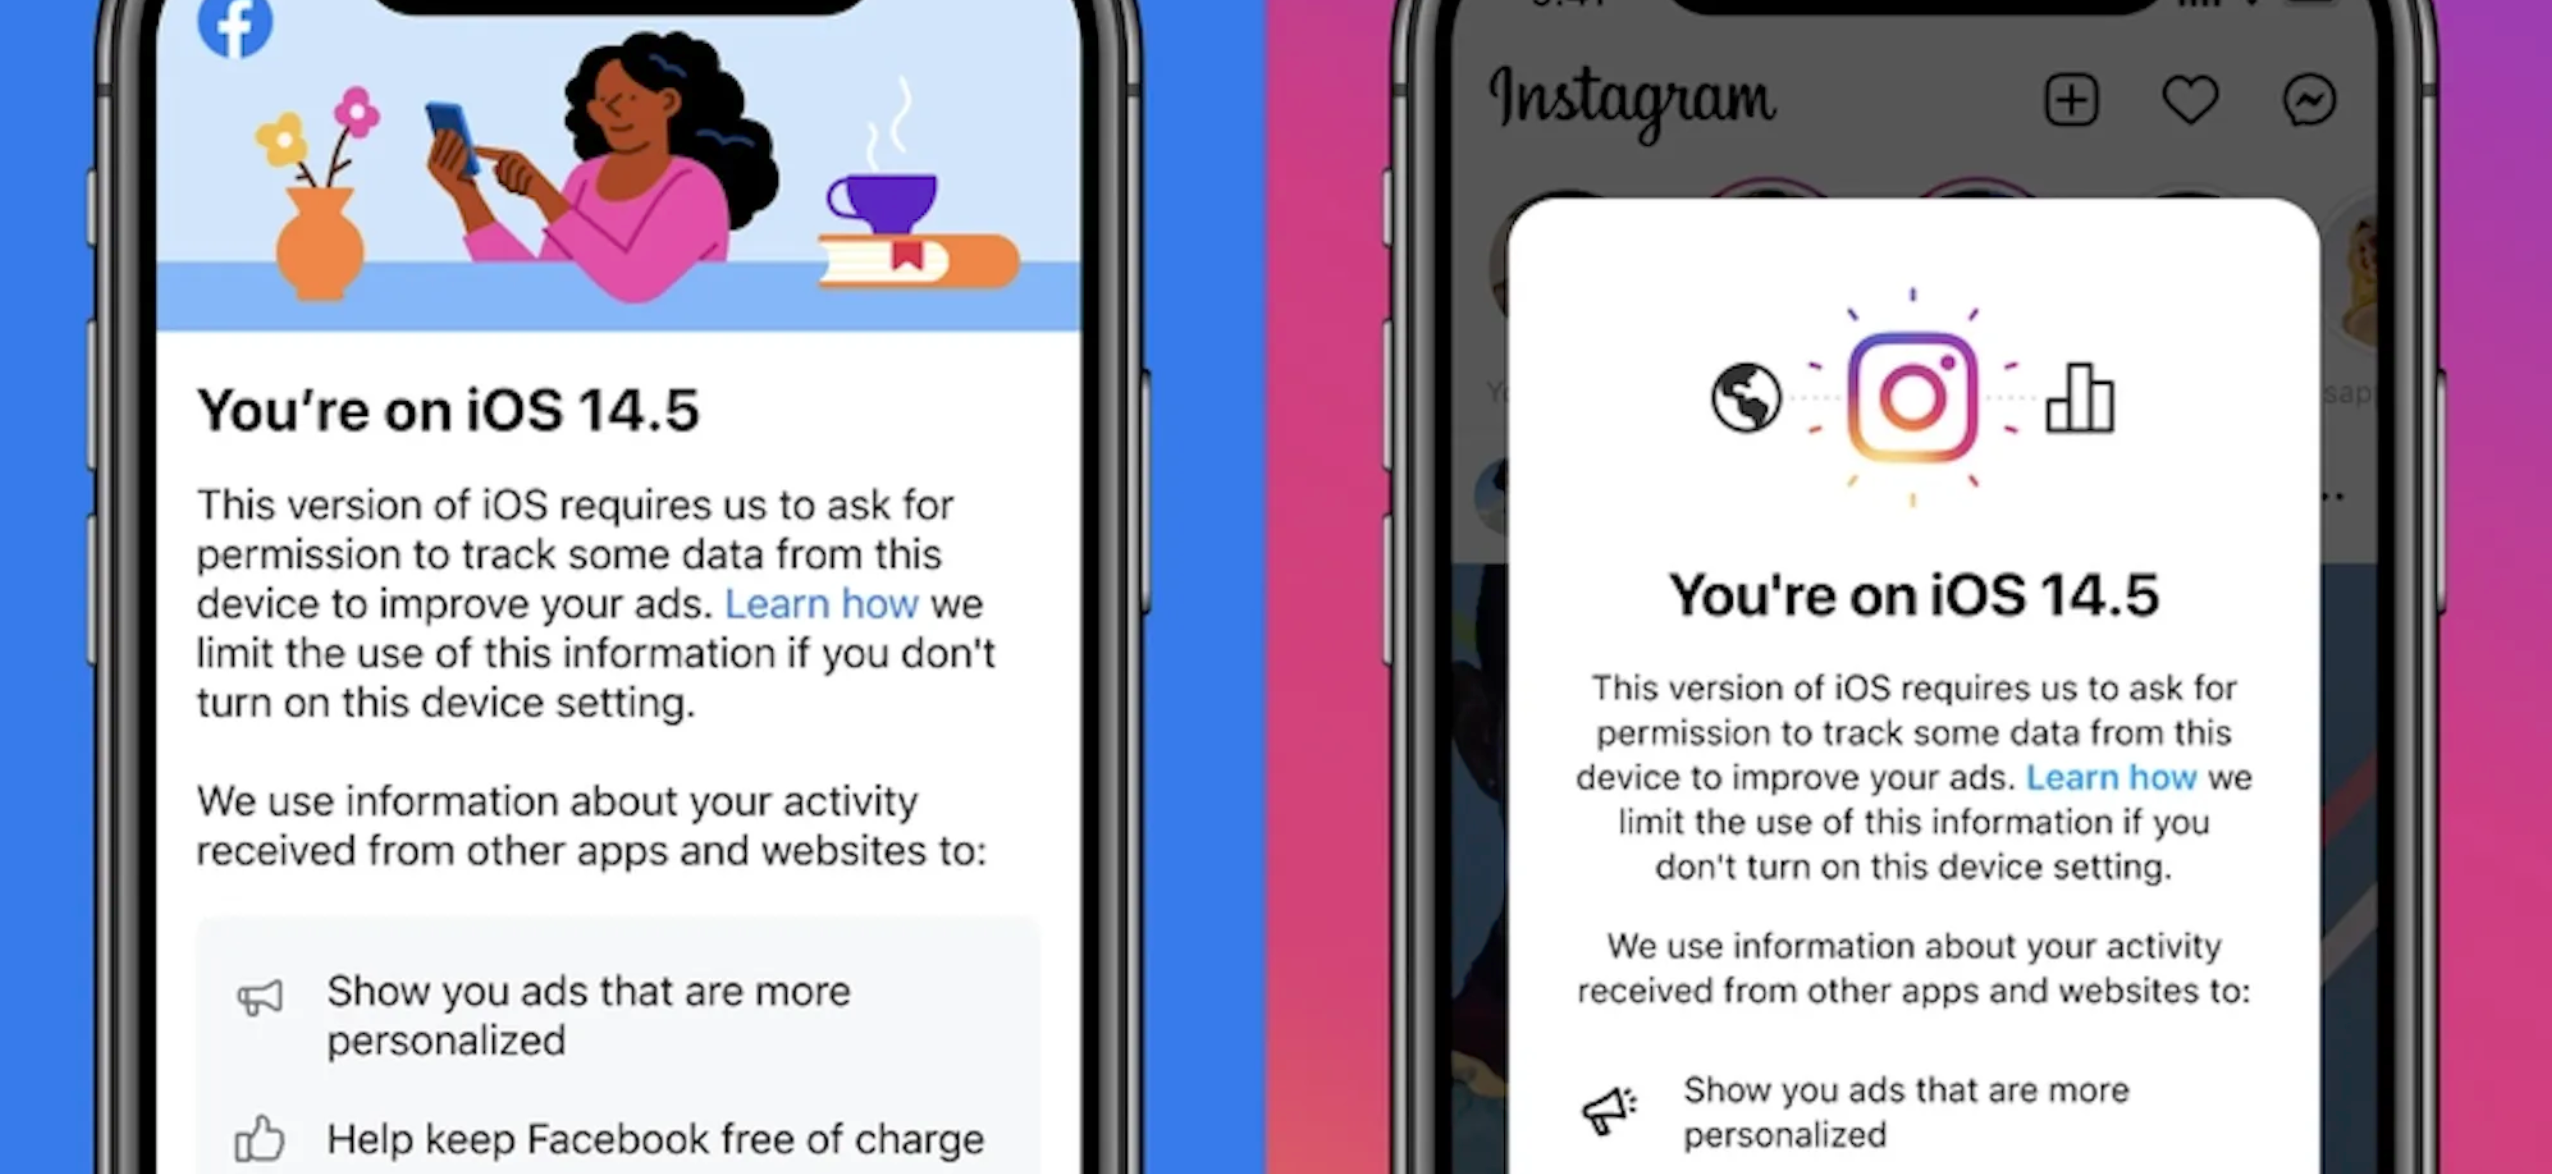 Social Media platforms Facebook and Instagram make Apple users pay for Apps to ensure digital marketing and advertising continues 